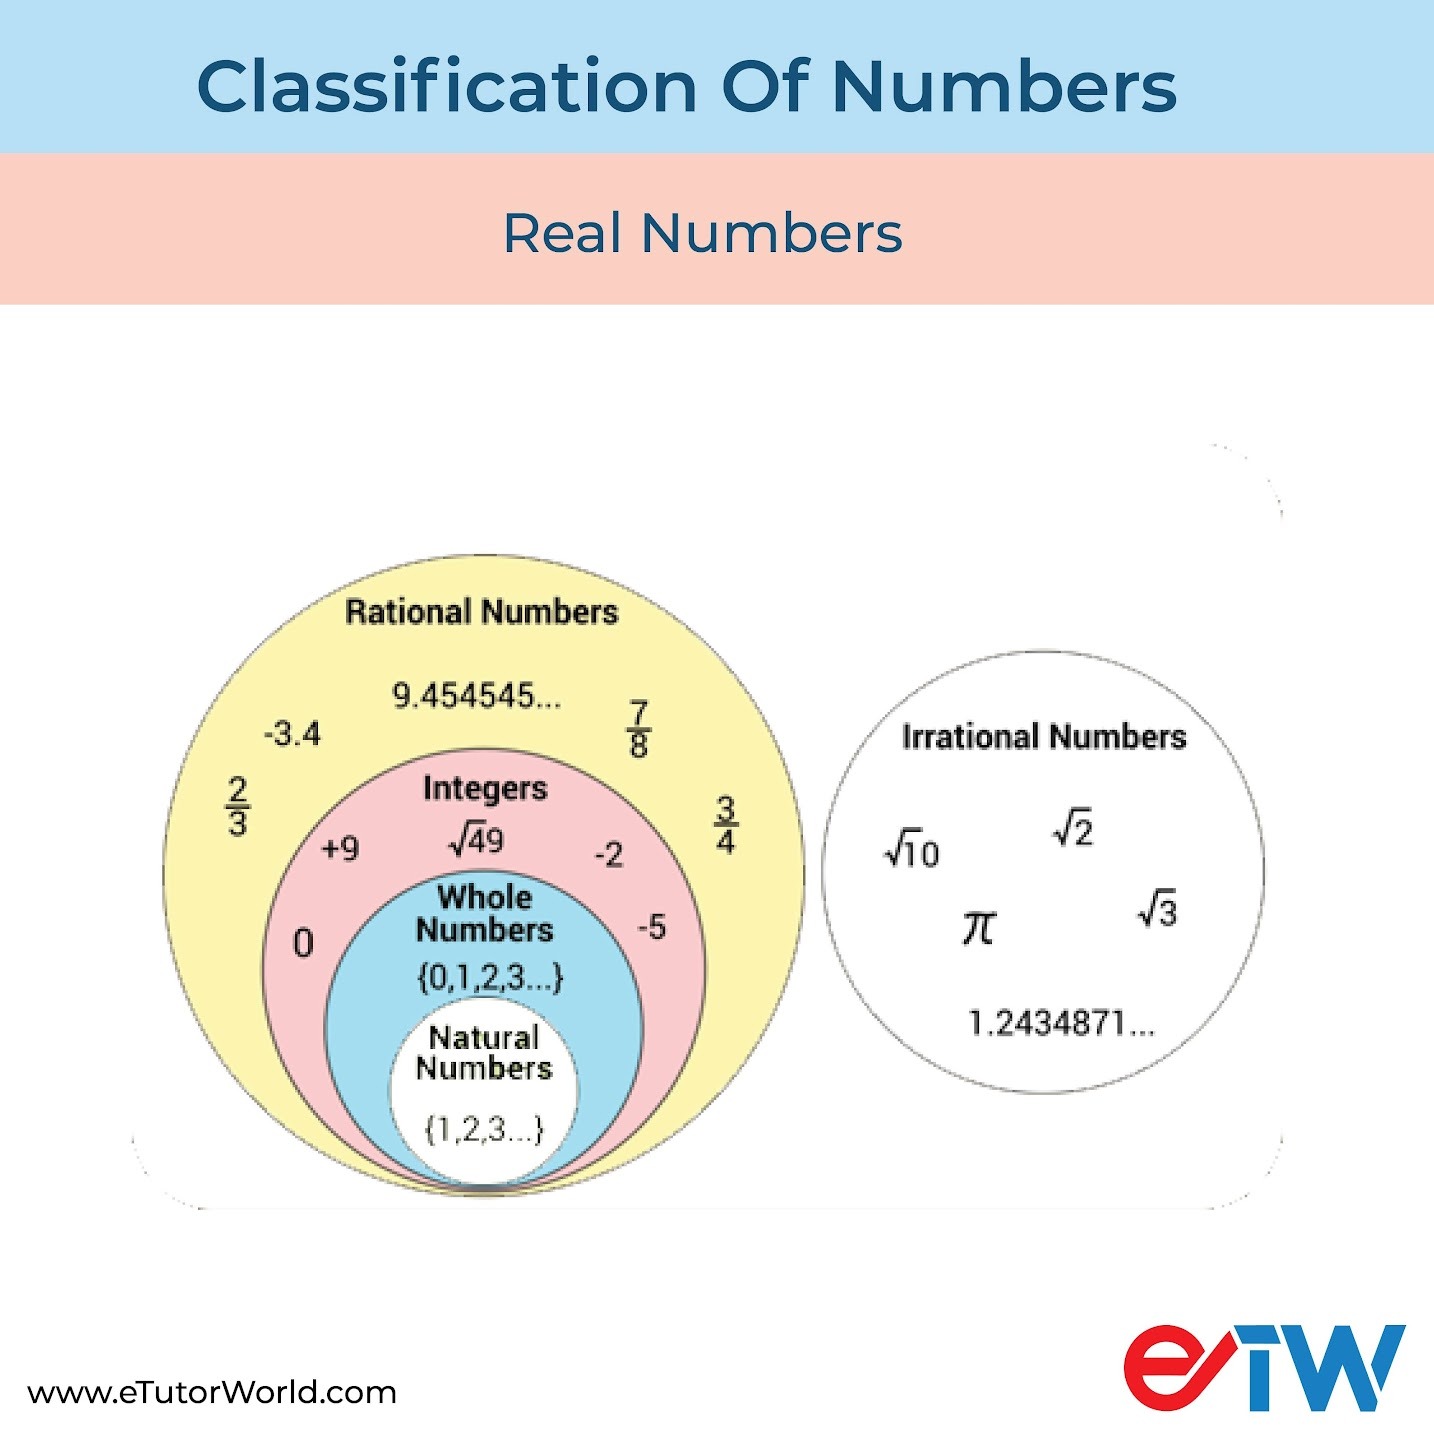 Classification of Numbers